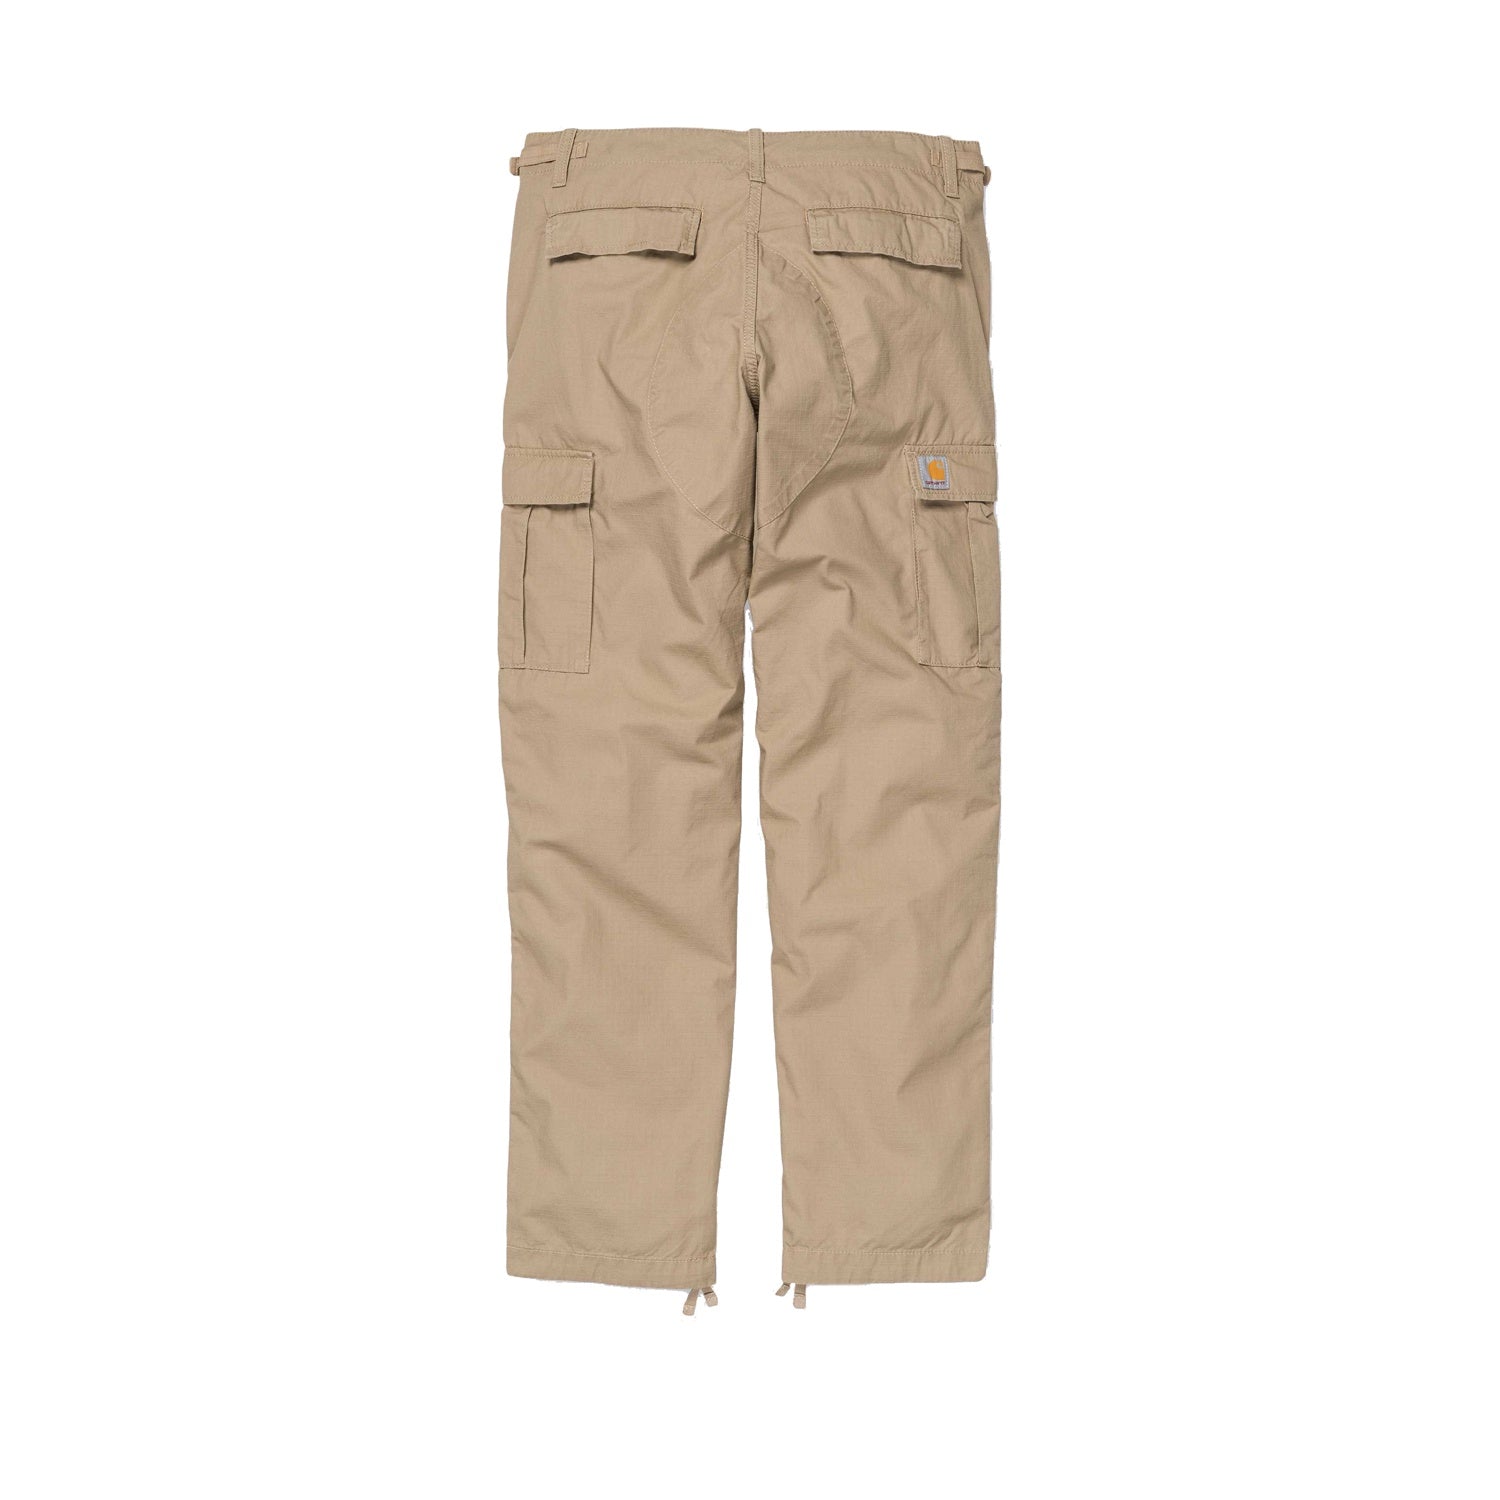 Carhartt WIP Aviation Pant Leather Rinsed